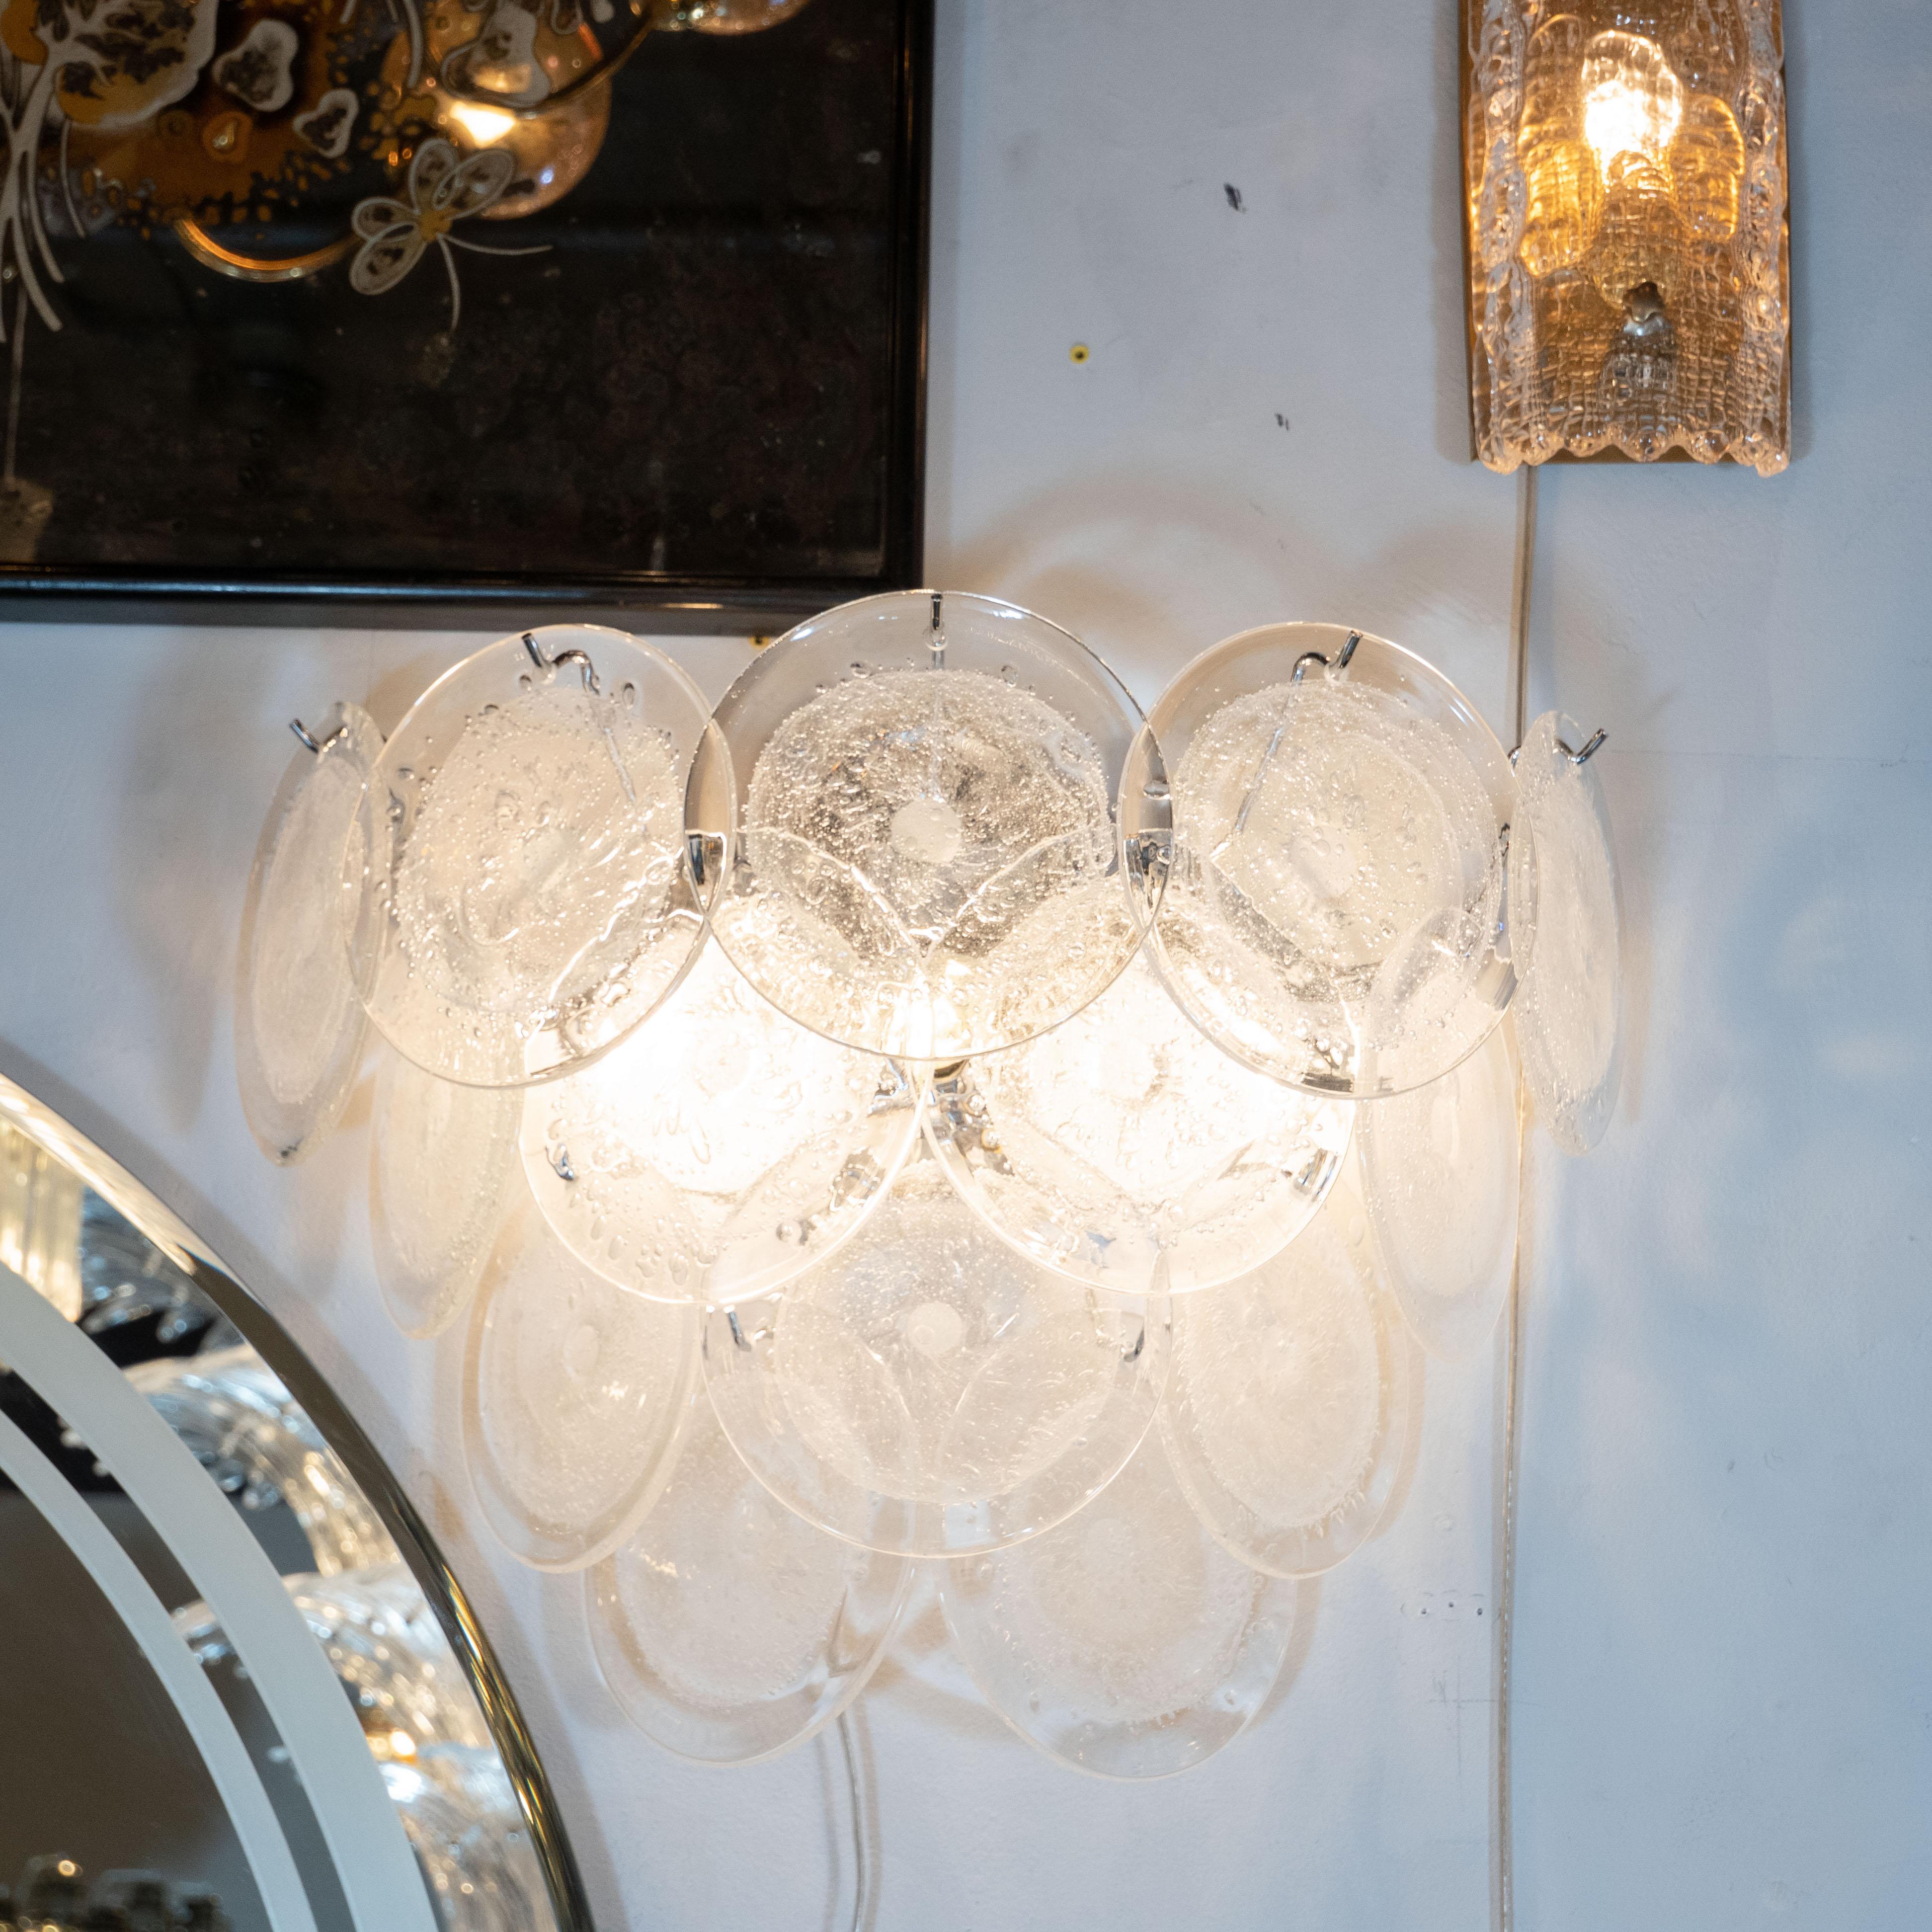 This beautiful pair of modernist 14-disc vistosi sconces were made exclusively for High Style Deco by our atelier in Murano, Italy- the island off the coast of Venice, renowned for centuries for its superlative glass production. Realized in the